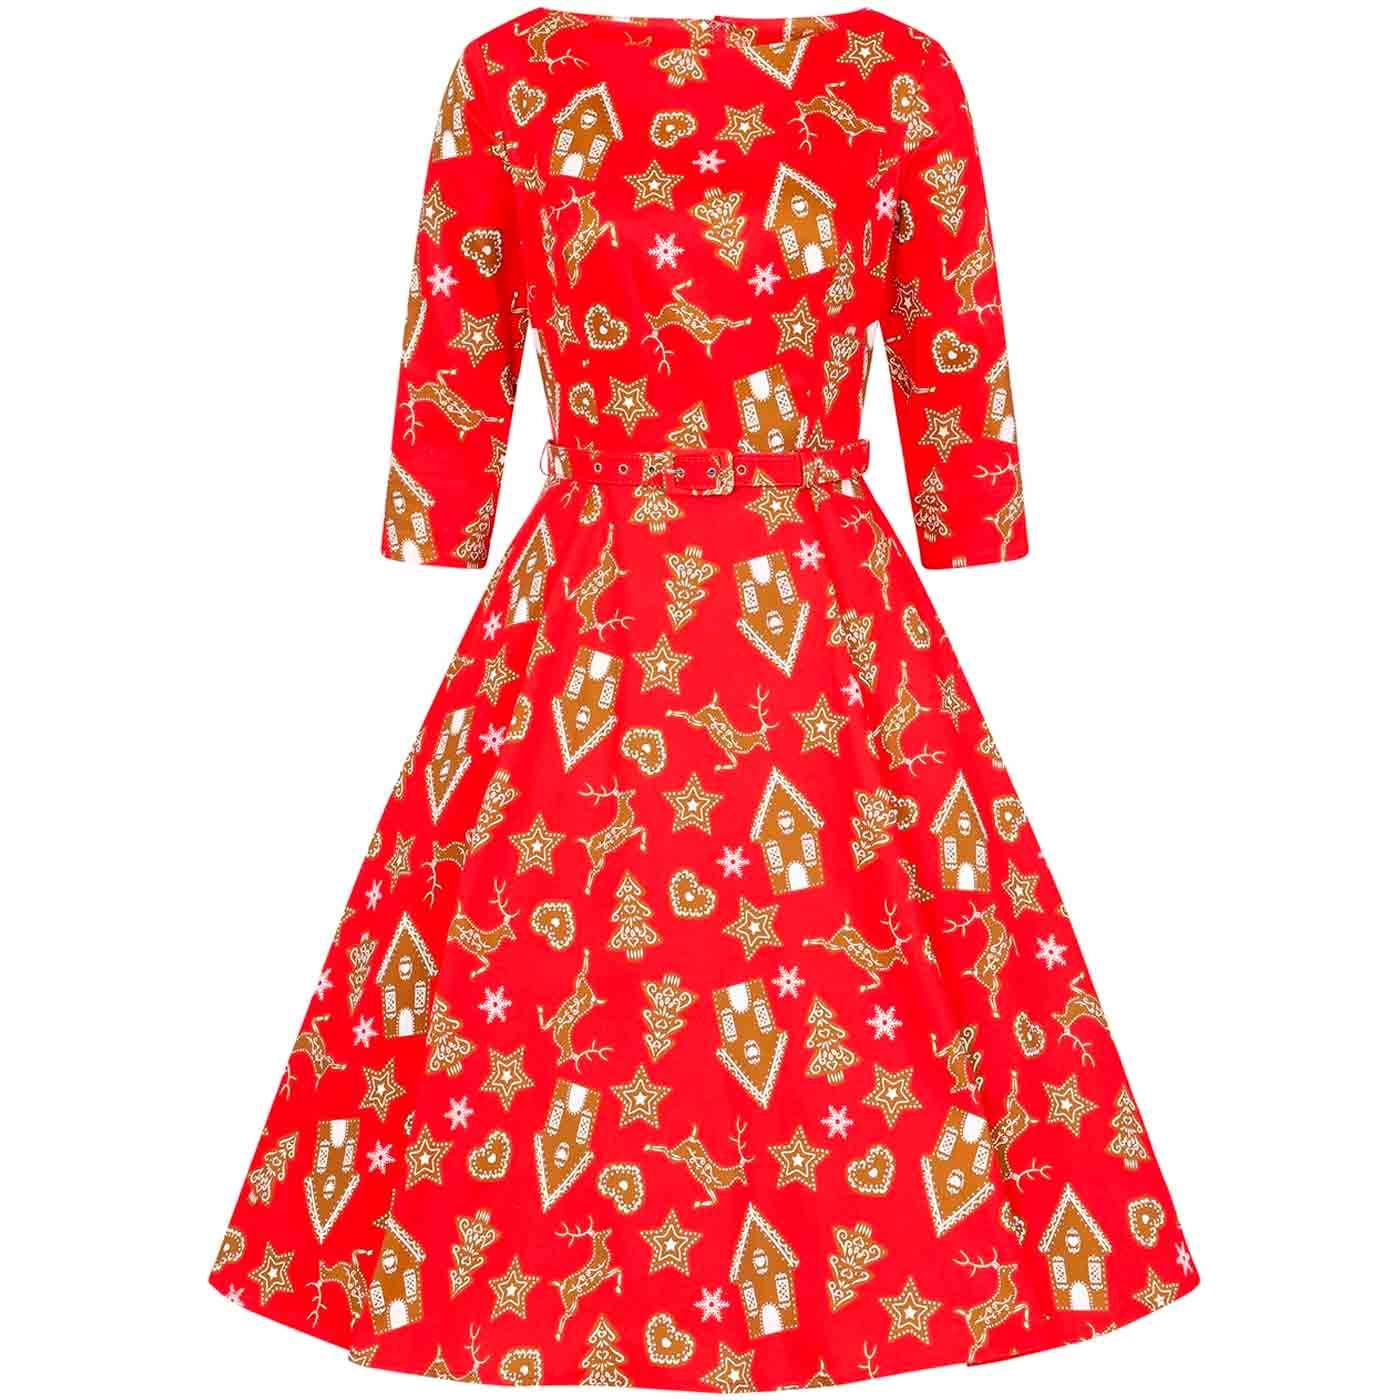 Suzanne COLLECTIF Retro Ginger Cookies Swing Dress